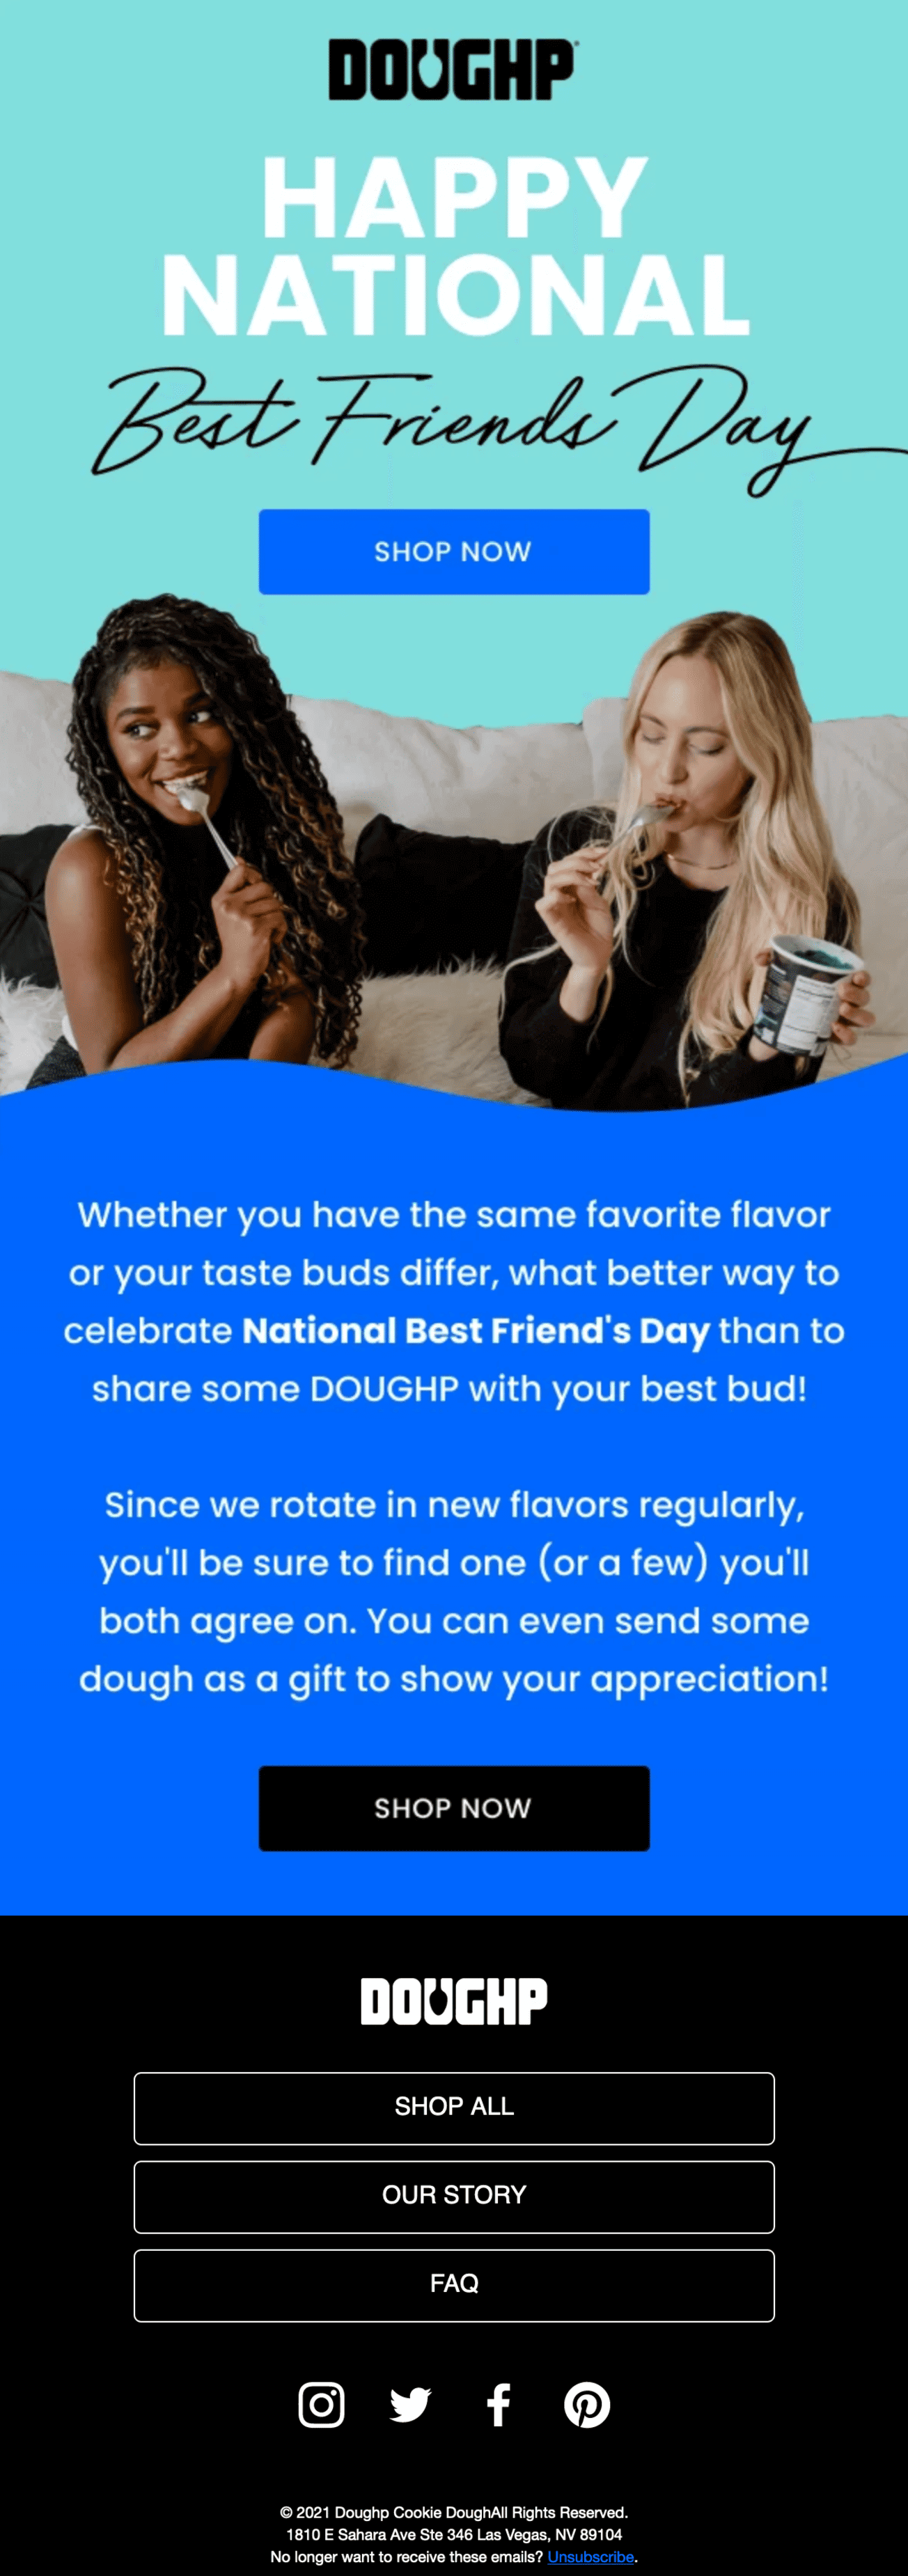 An email encouraging readers to celebrate the Best Friends Day by buying and sharing some ice cream